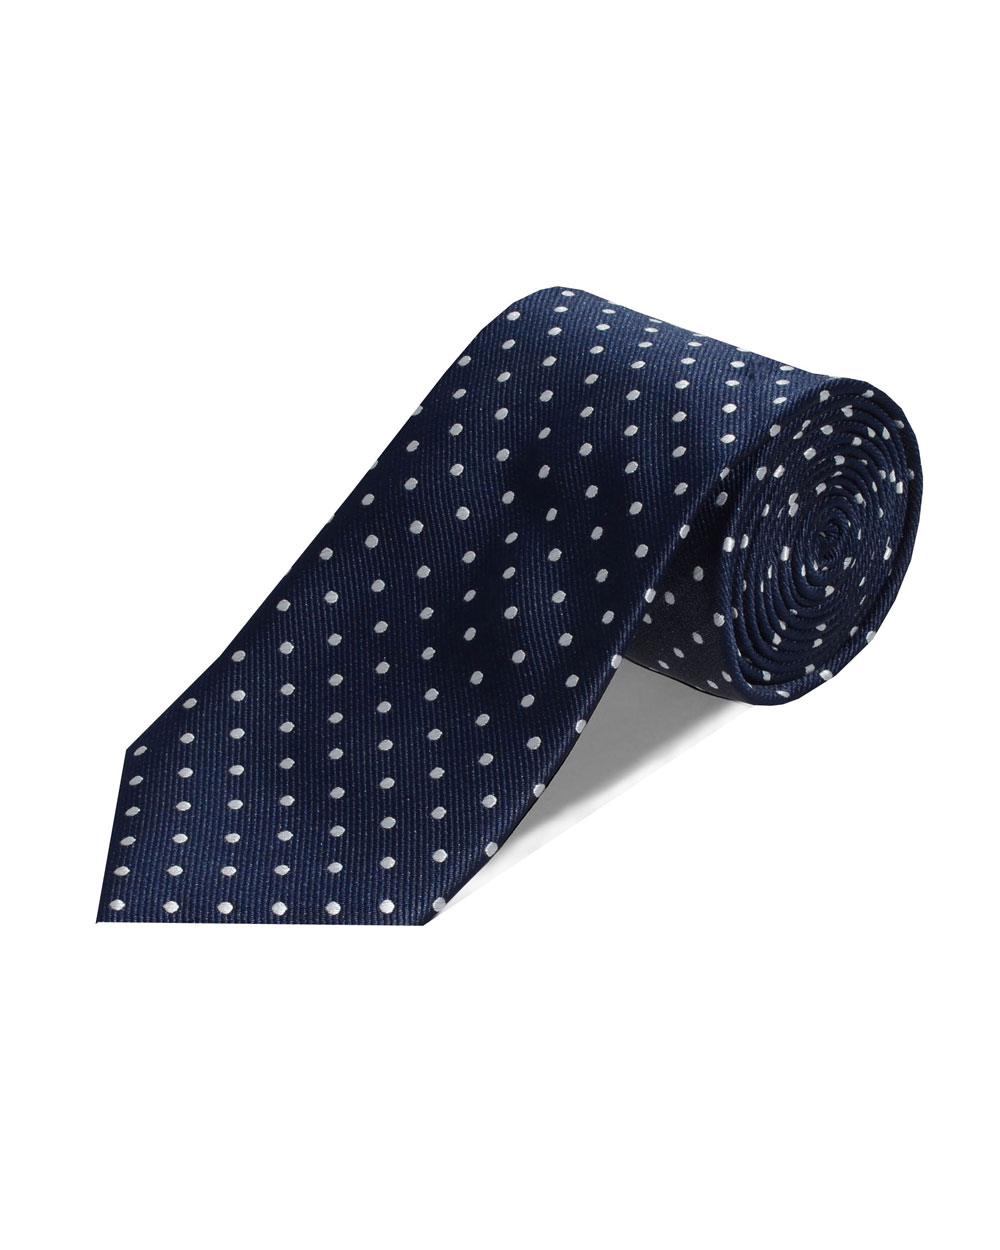 Double Two Extra Long Patterned Tie (navy/white)